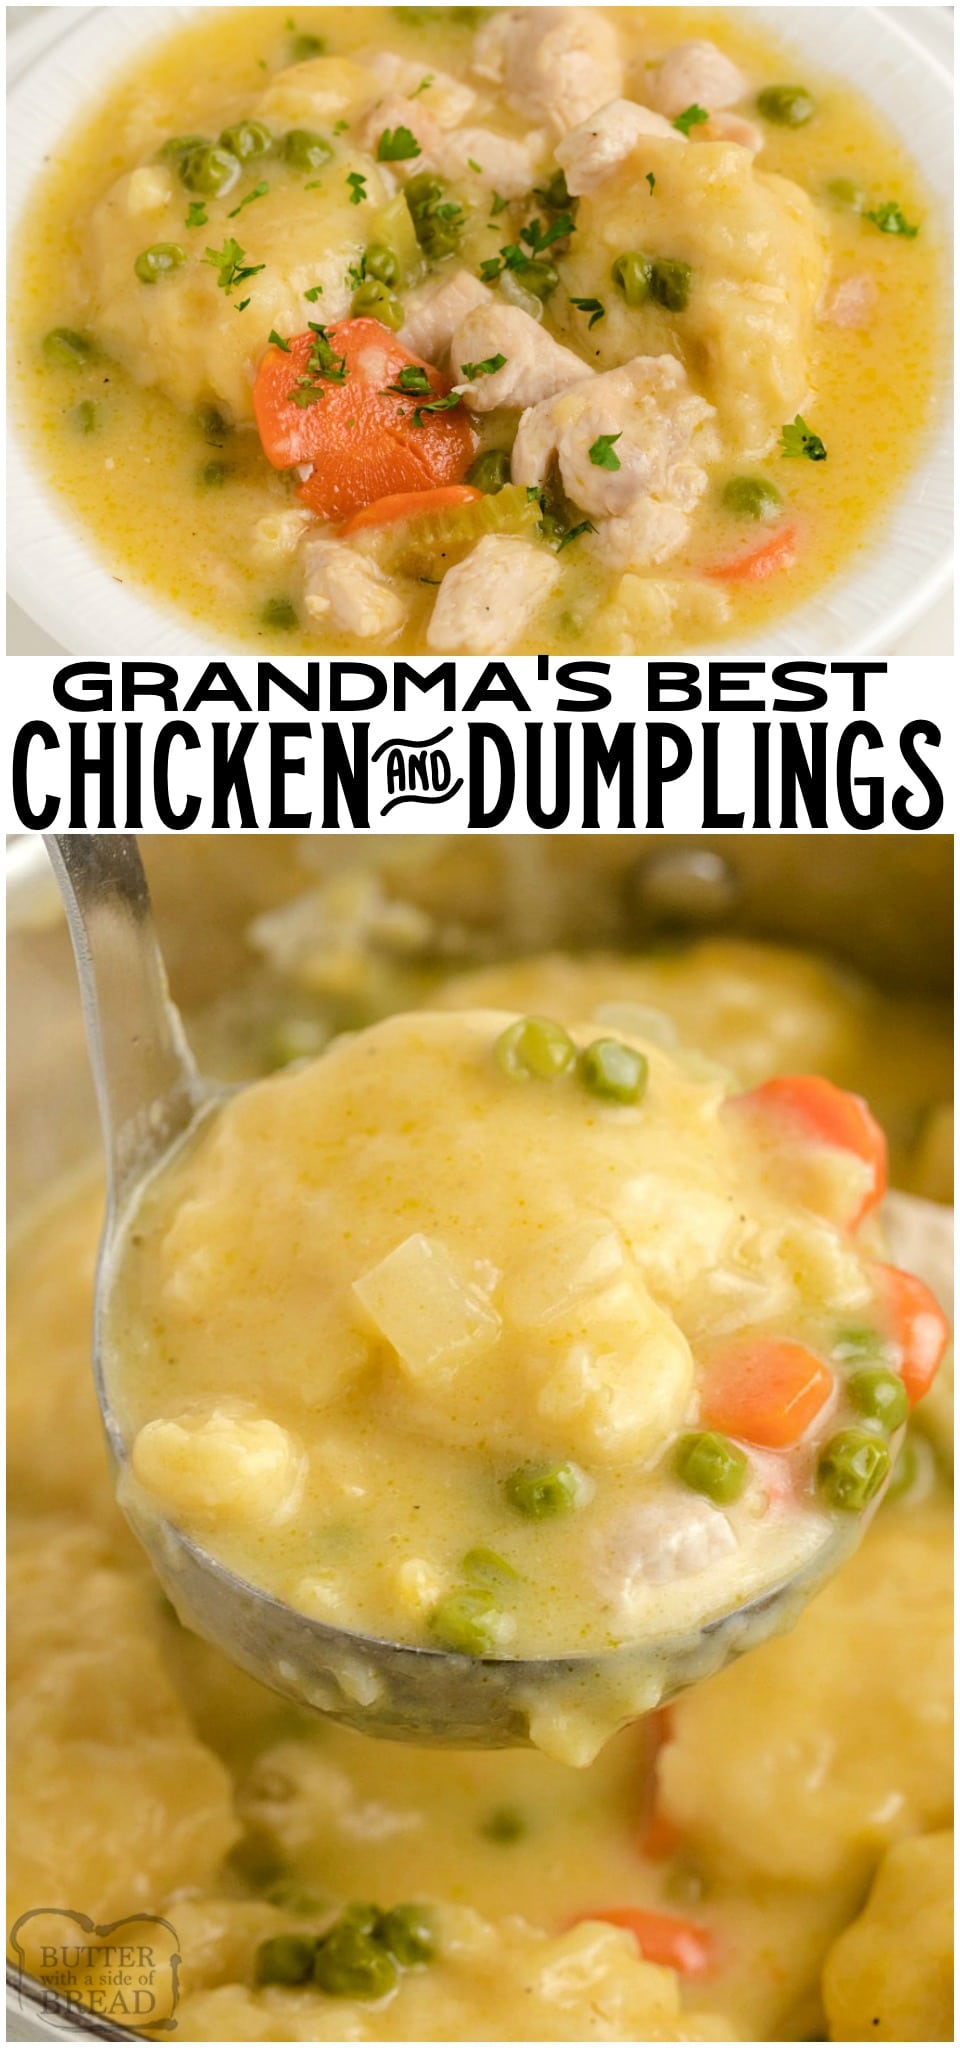 Chicken and Dumplings recipe made with juicy chicken, fresh vegetables and homemade biscuit dumplings. Seriously THE BEST homemade dumplings you've ever tasted. Simple tips to make the EASIEST chicken dumplings dinner ever.